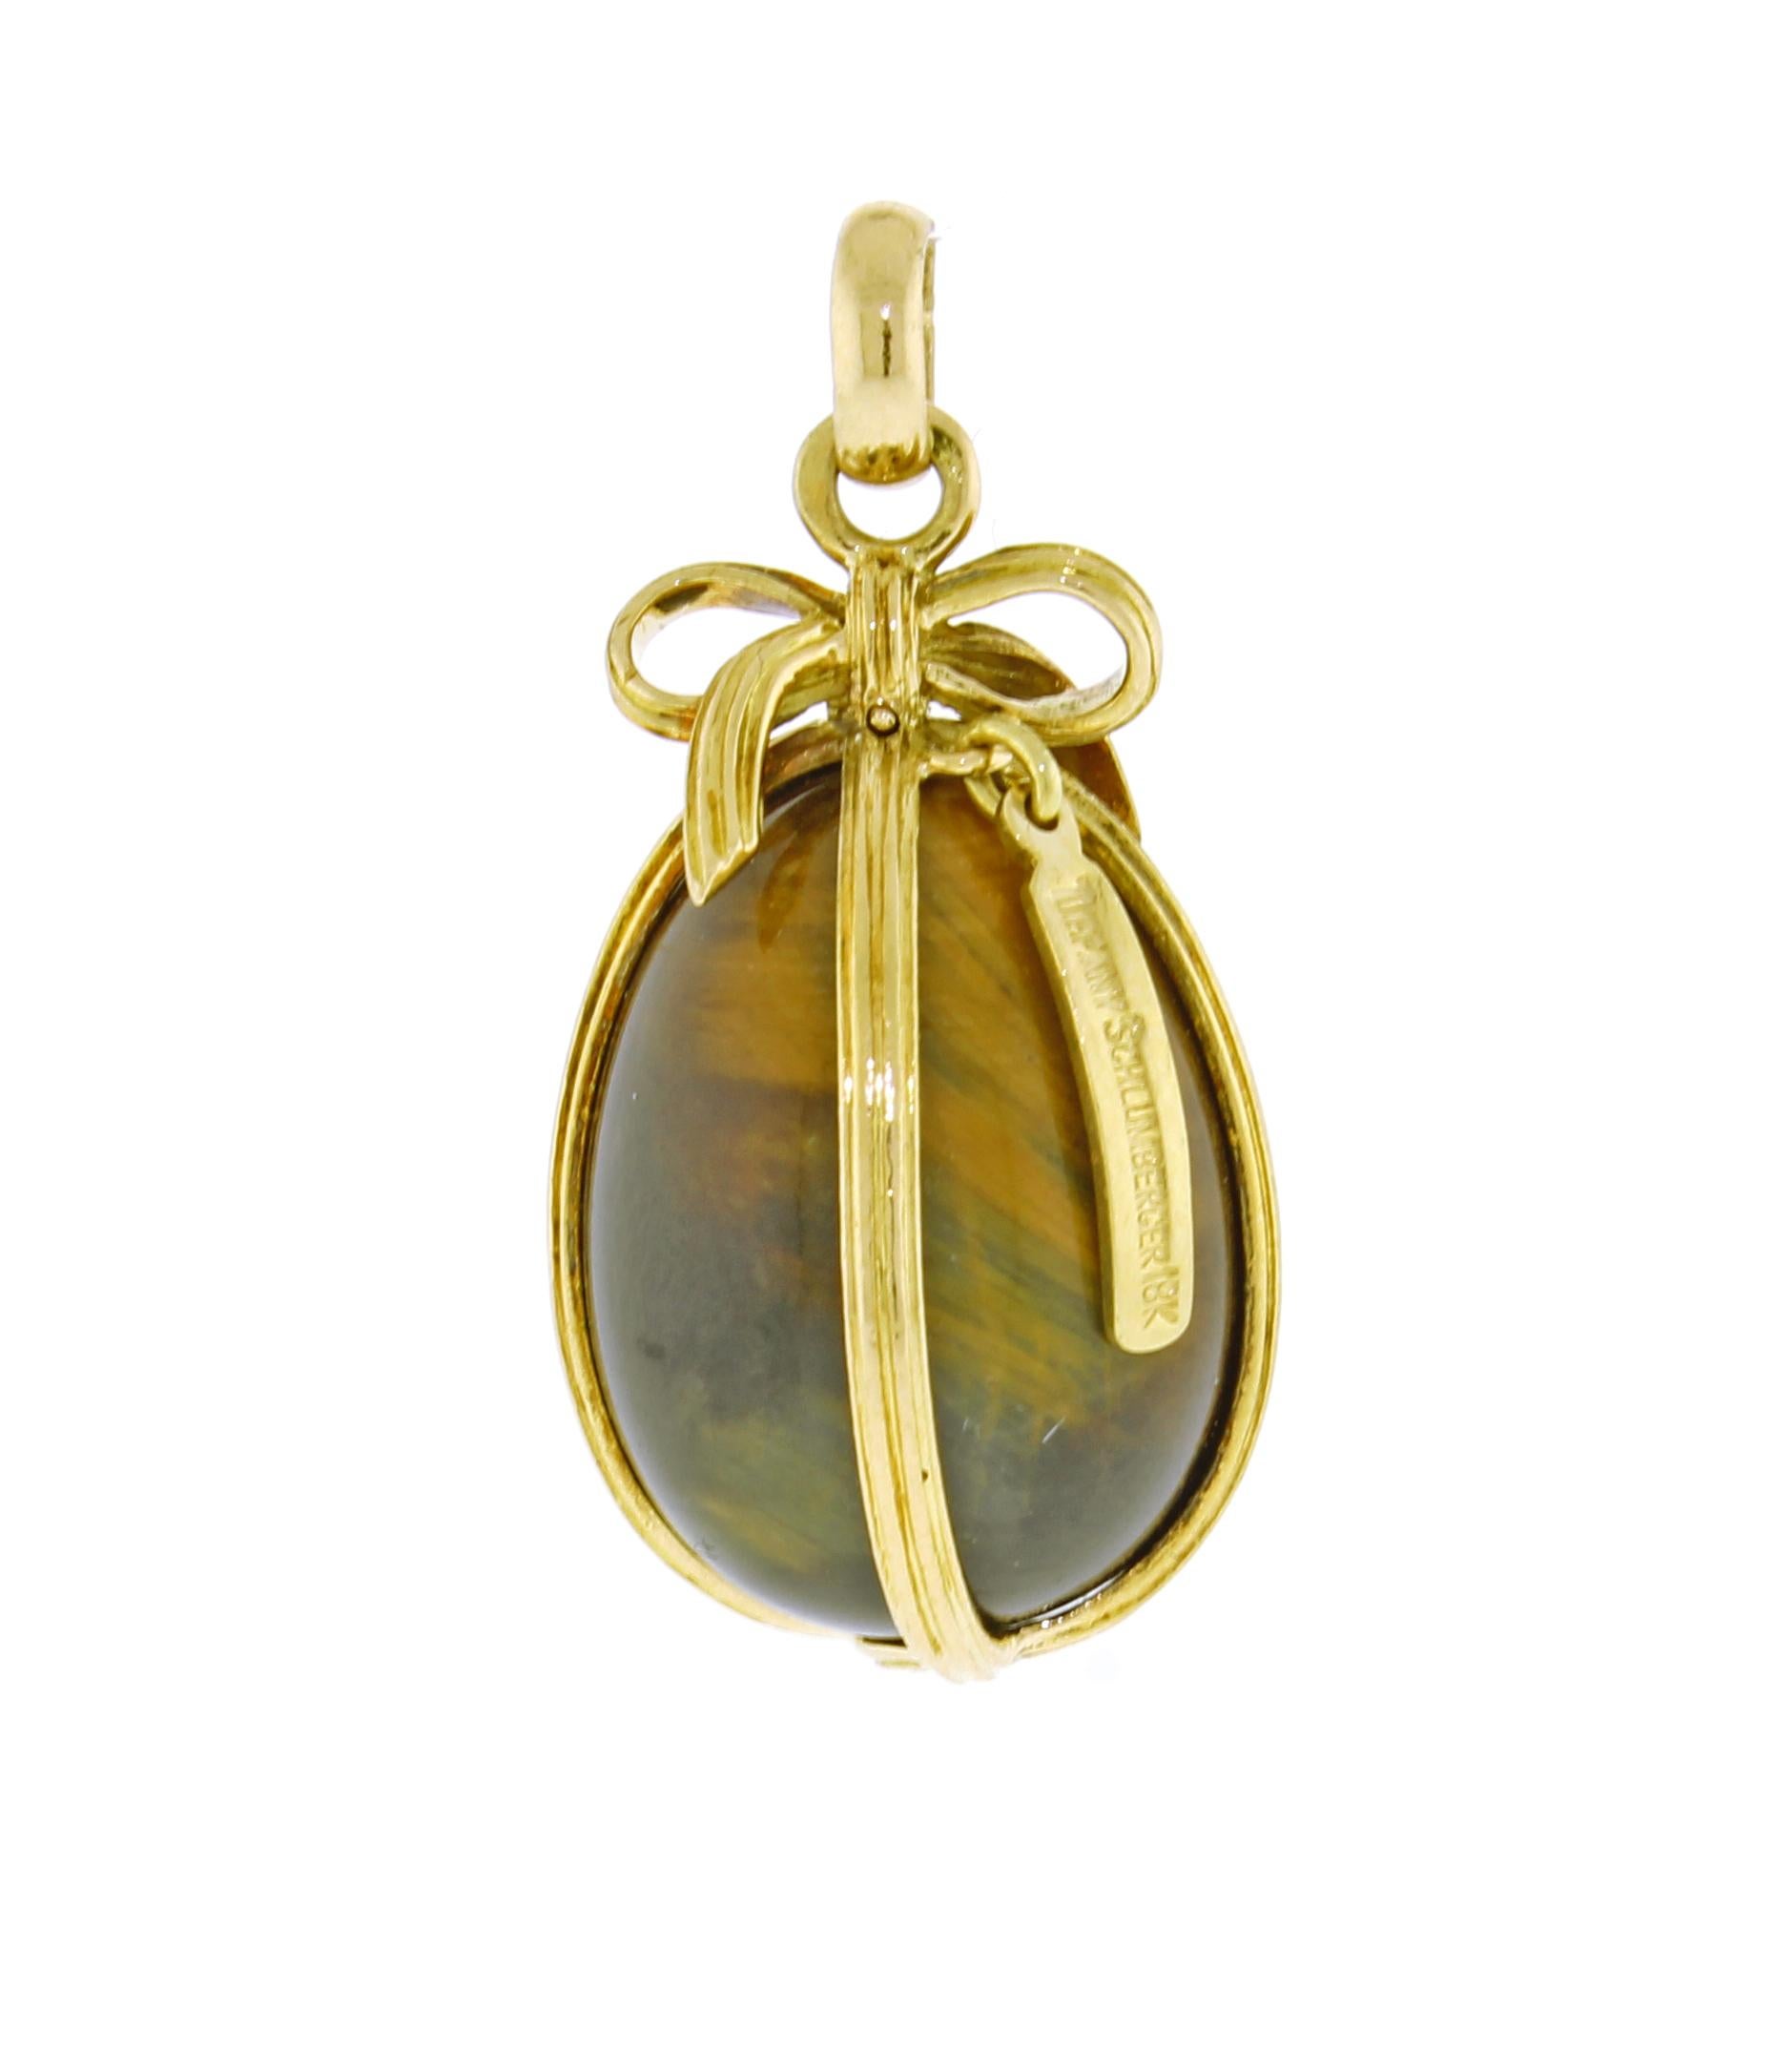 From  Jean Schlumberger his large Tiger's eye caged egg charm.
♦ Designer: Jean Schlumberger
♦ Metal: 18 karat
♦ Gem stone: Tigers eye
♦ Circa 2003
♦ Size 35mm X18mm
♦ Packaging: Tiffany & Co box and pouch
♦ Condition: Excellent , pre-owned
♦ Price: